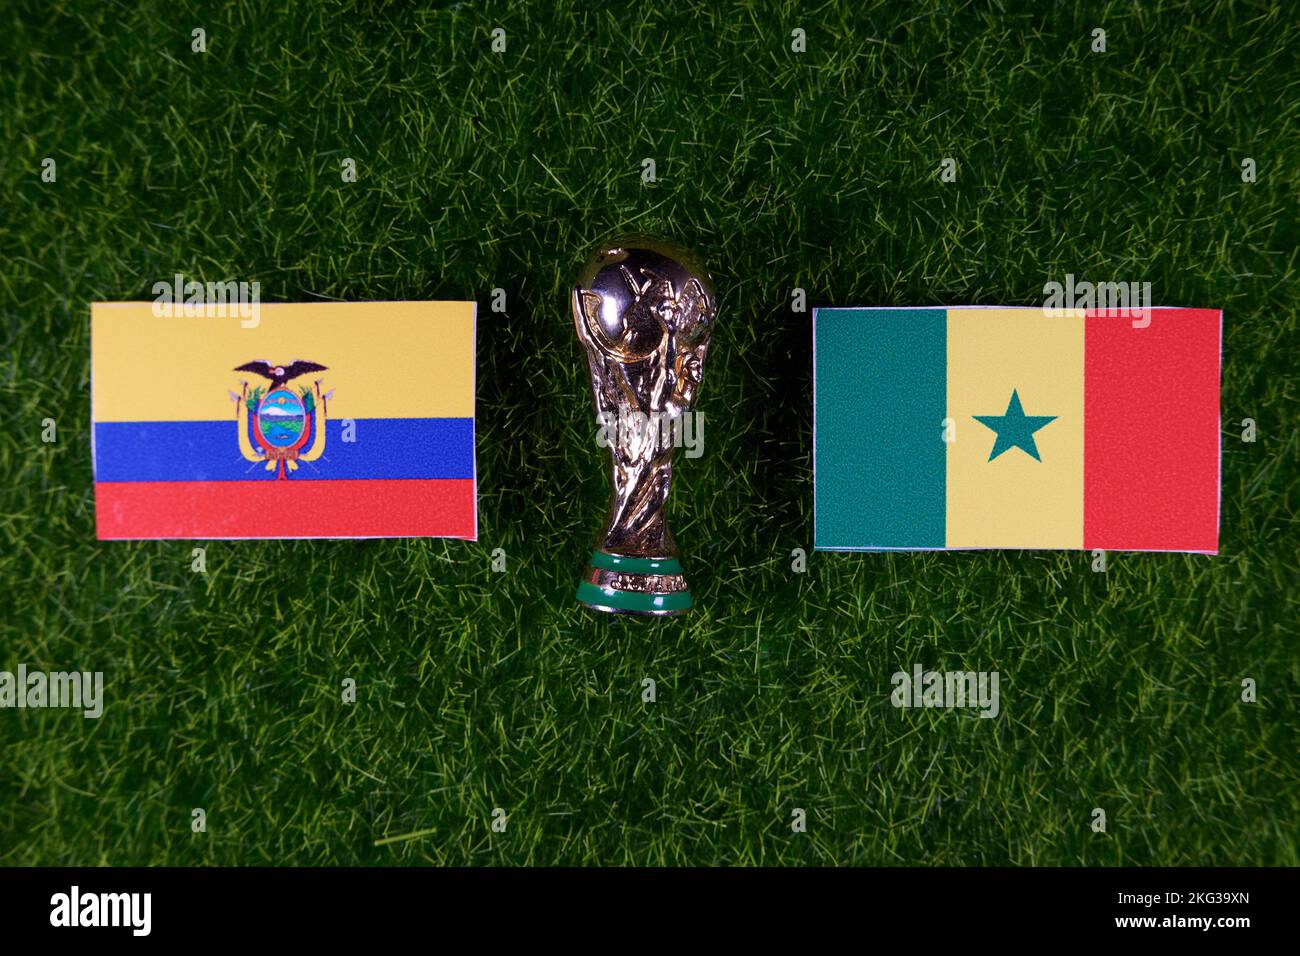 November 20, 2022, Doha, Qatar. Flags of Ecuador and Senegal and the FIFA World Cup trophy on the green lawn of the stadium. Stock Photo